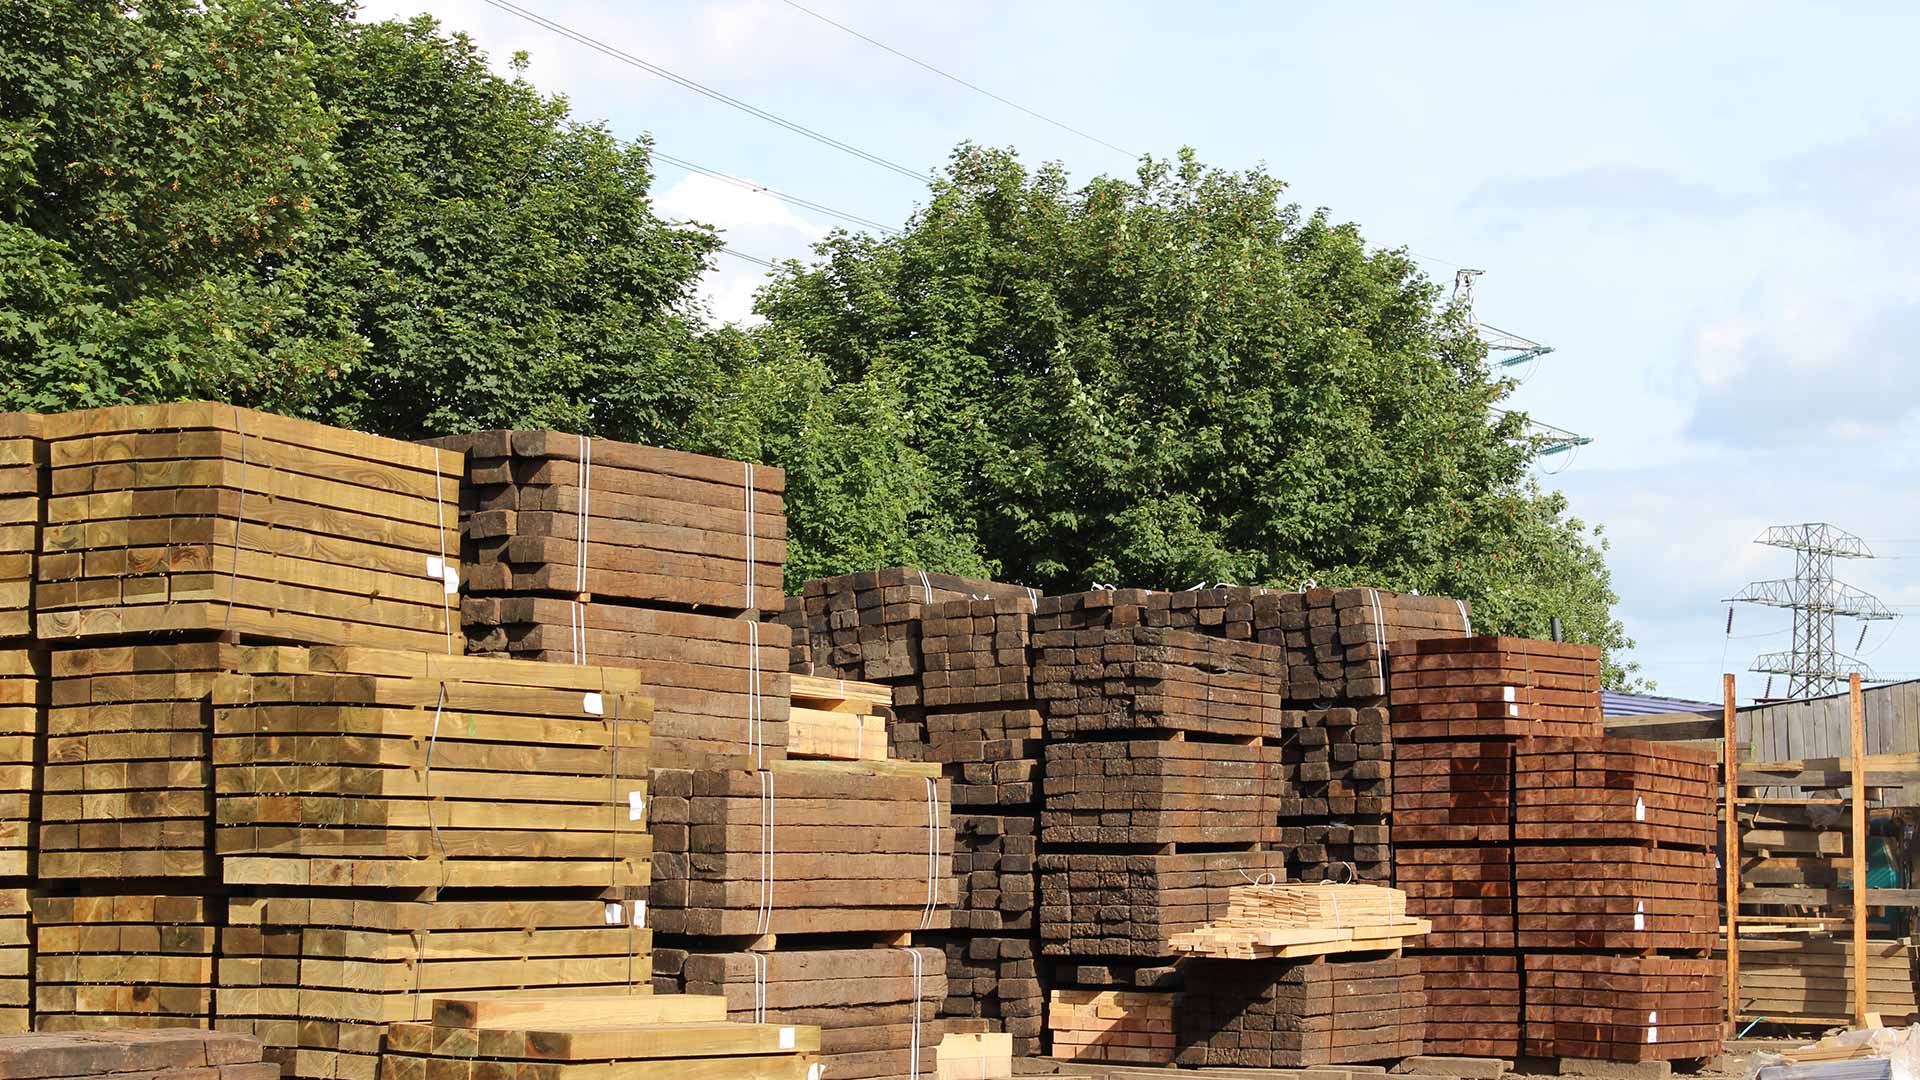 Picture of railway sleepers in yard.